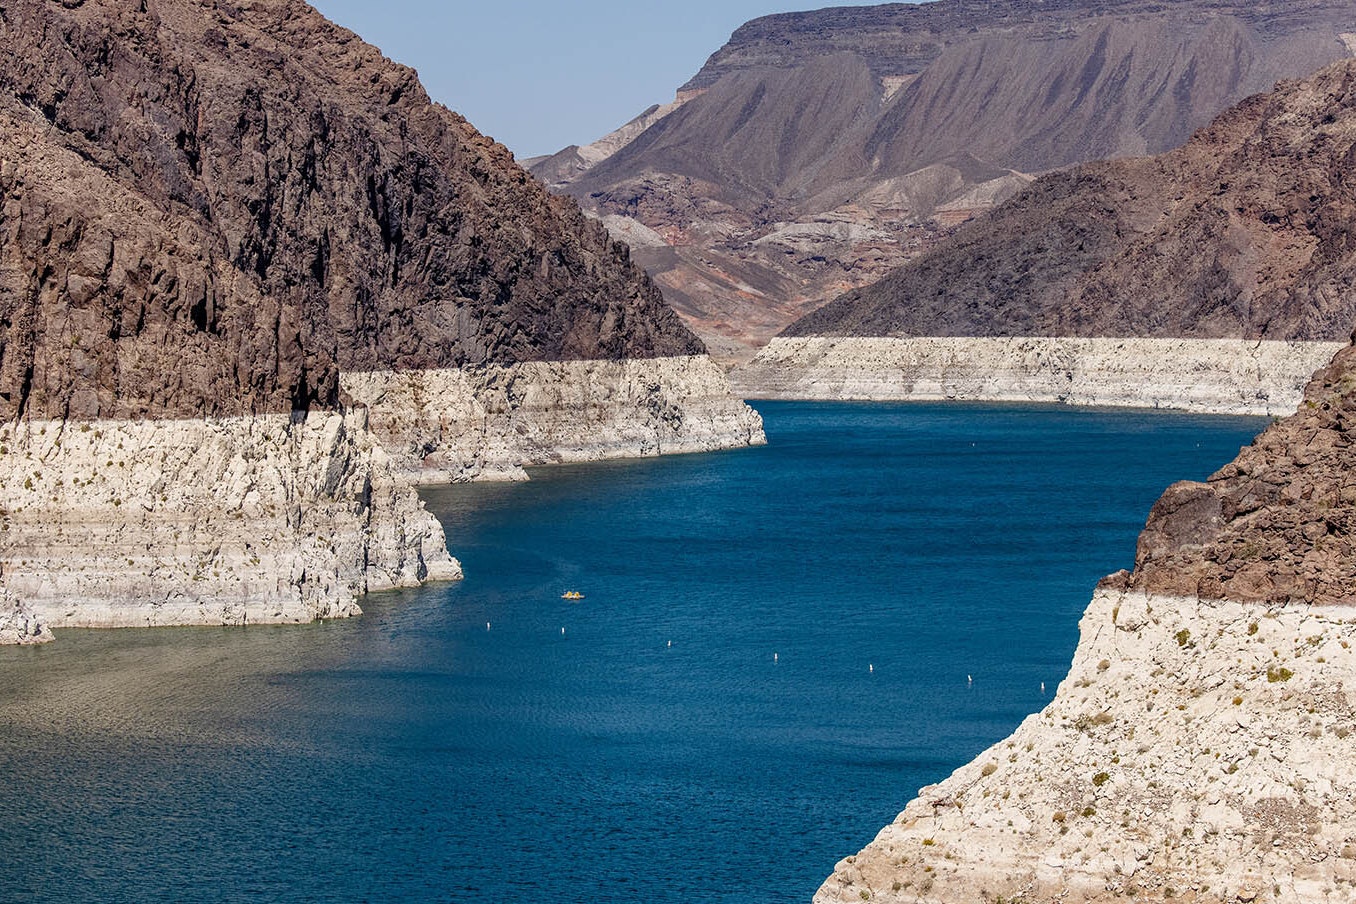 The waterline on the Colorado River as it runs through Nevada shows the stark reality of continuing stresses on the river and the 40 million people who rely on it.